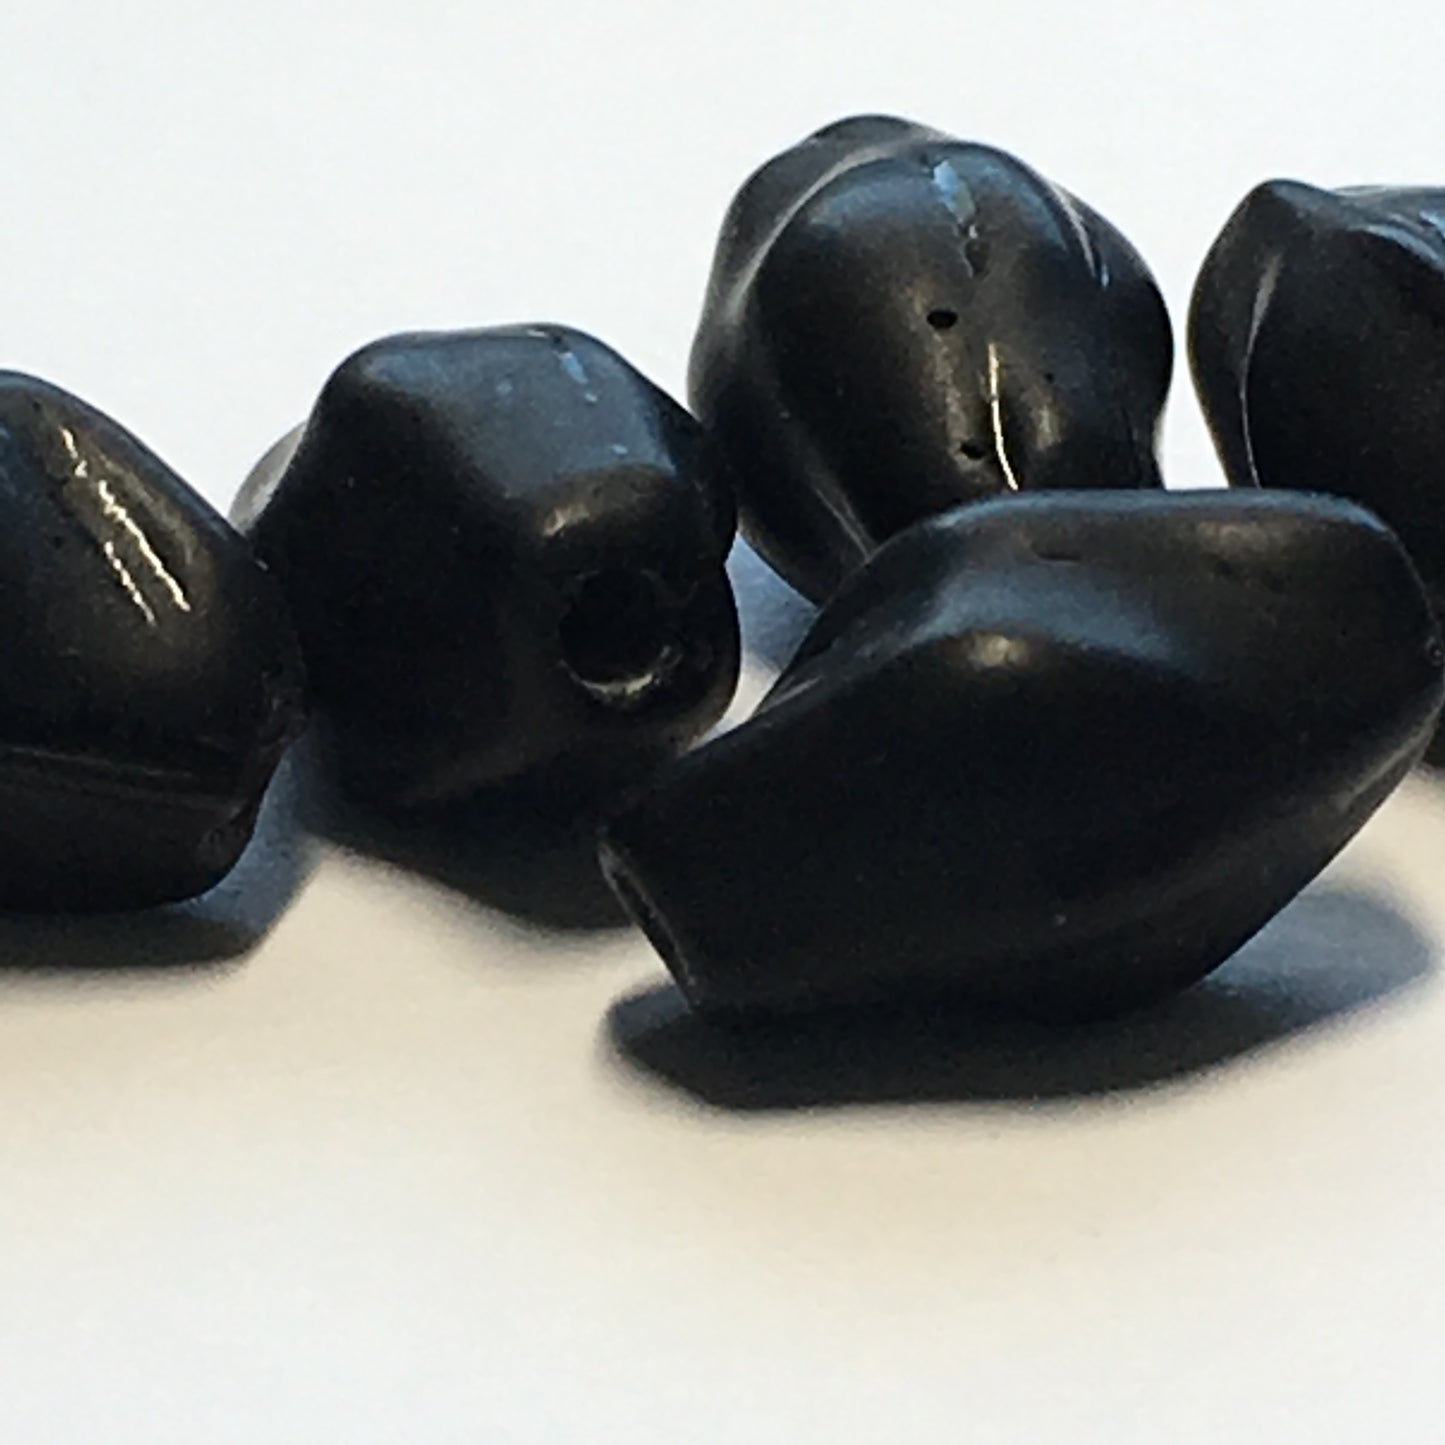 Matte Opaque Black Twisted Lampwork Glass Beads, 12 x 8 mm - 5 Beads